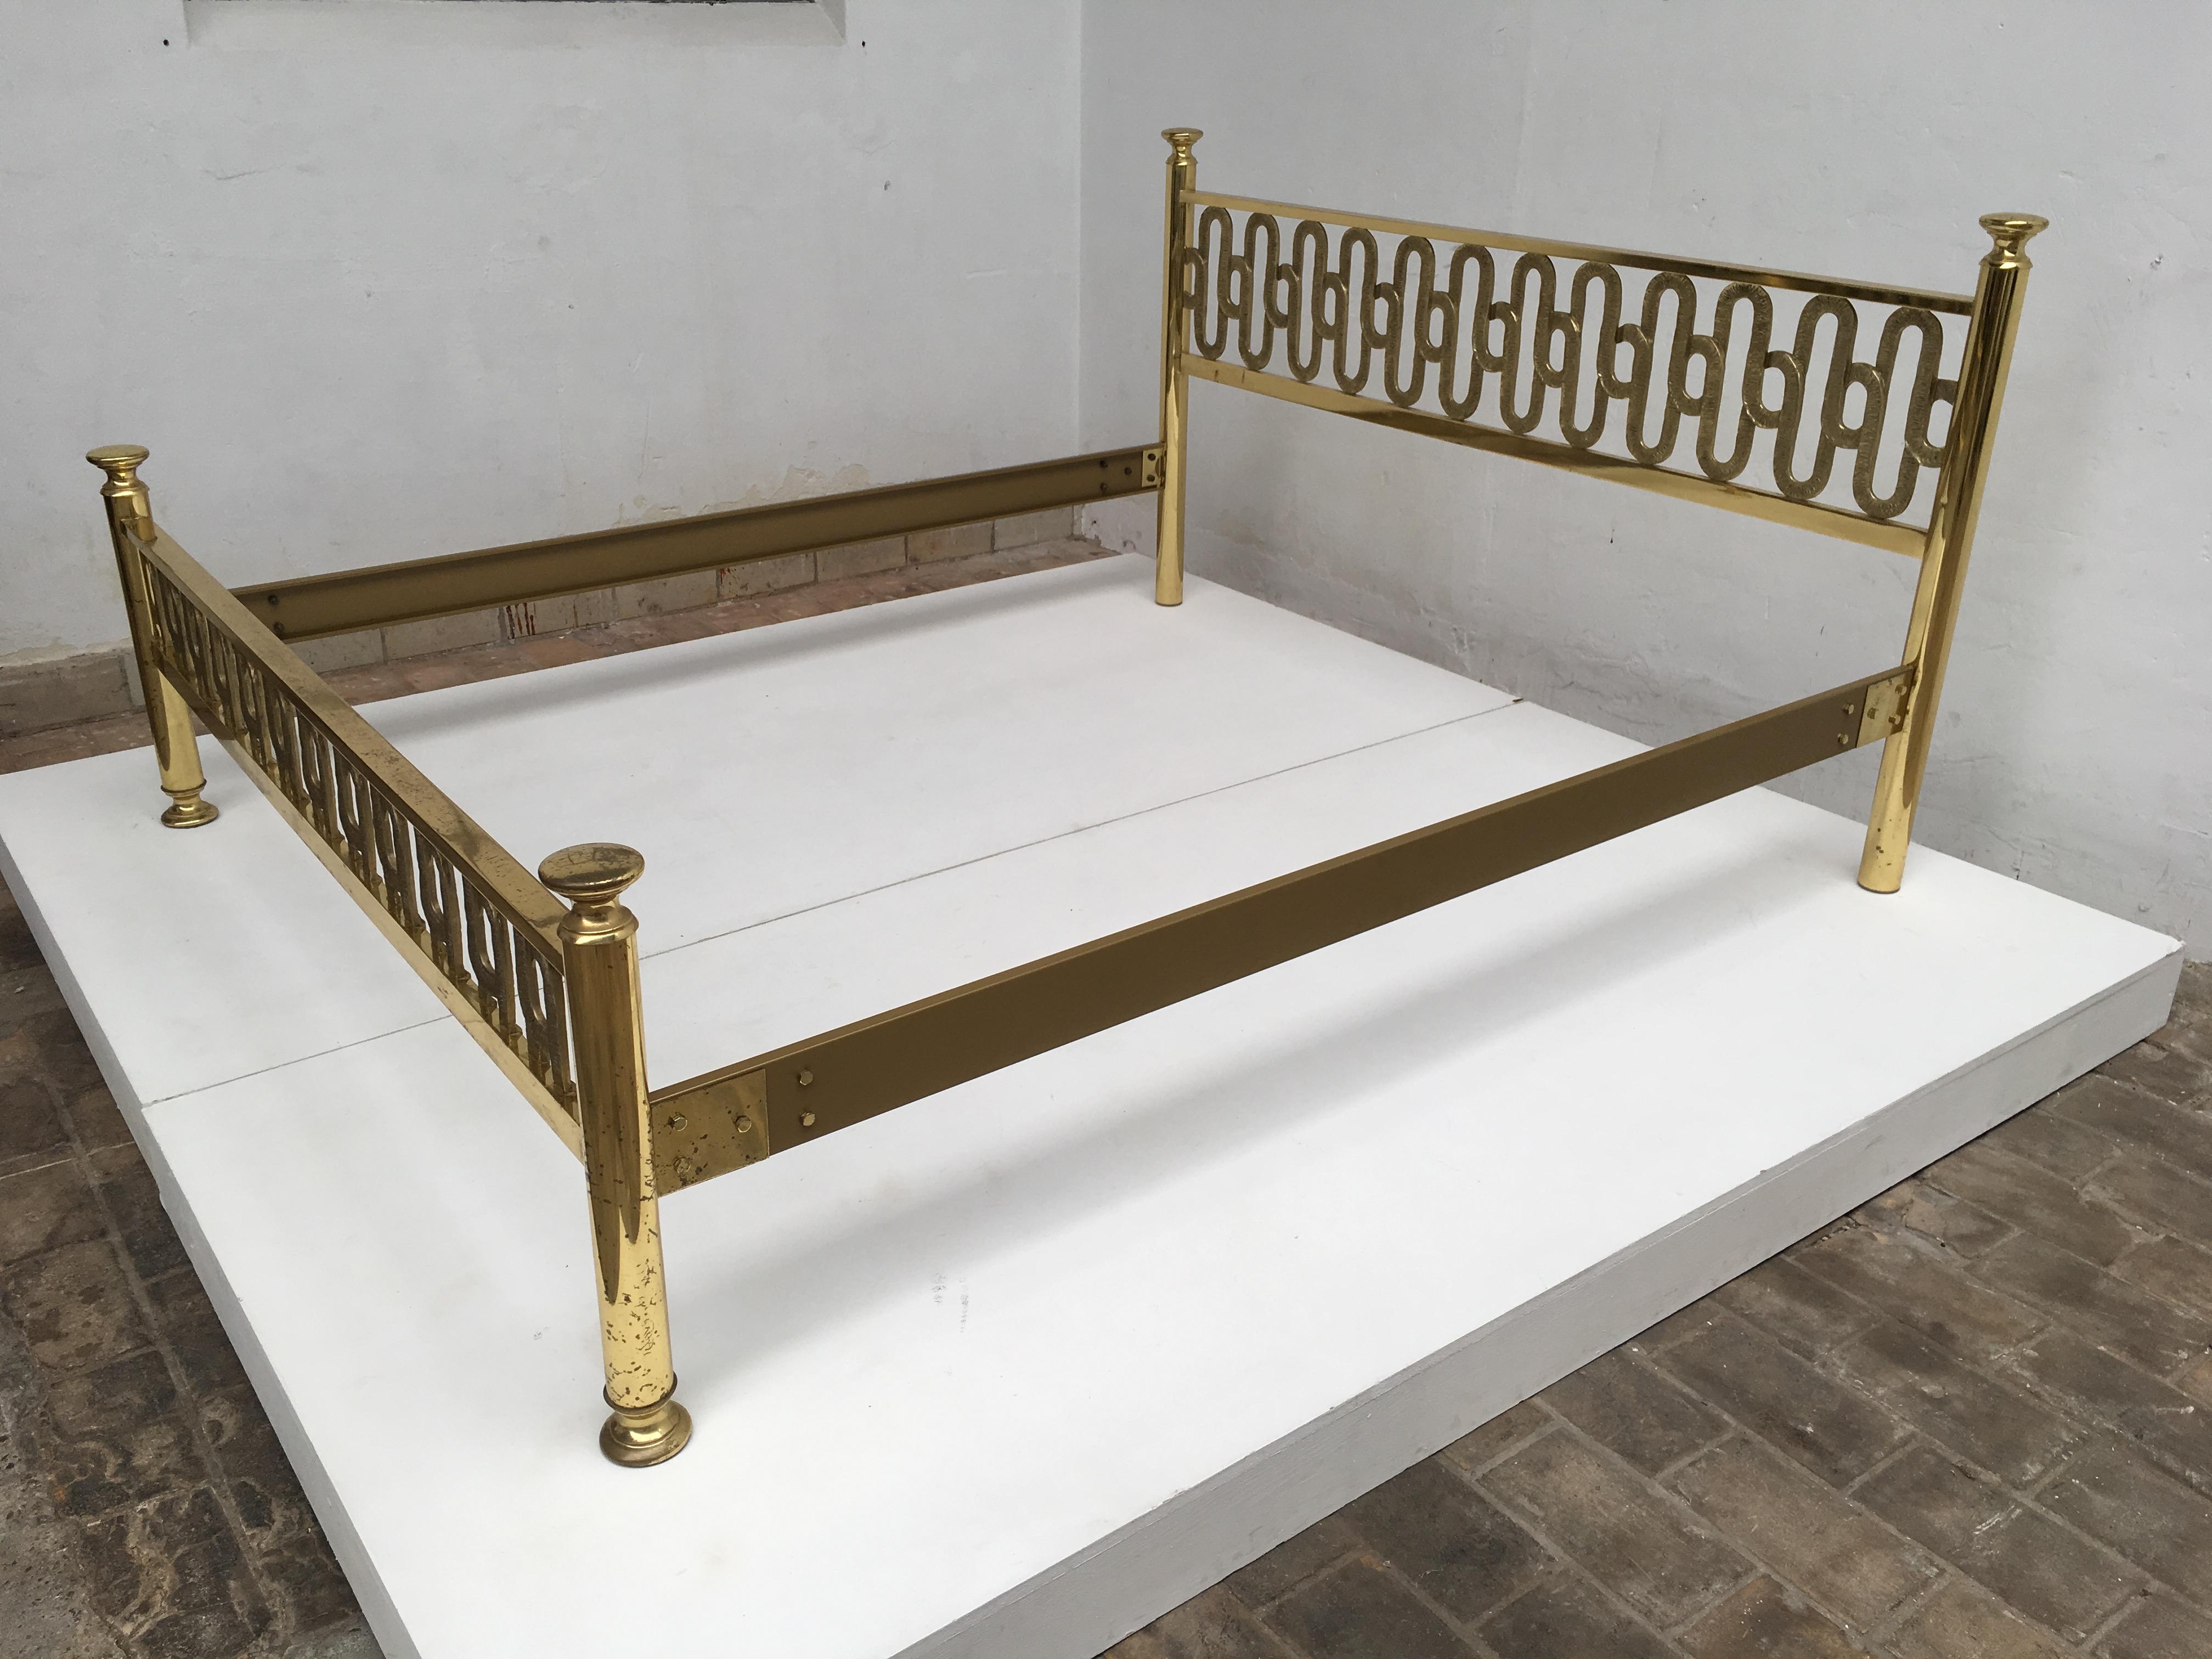 Enameled Stunning Brass Sculptural Form Double Bed by Angelo Brotto, Esperia, 1970, Italy For Sale